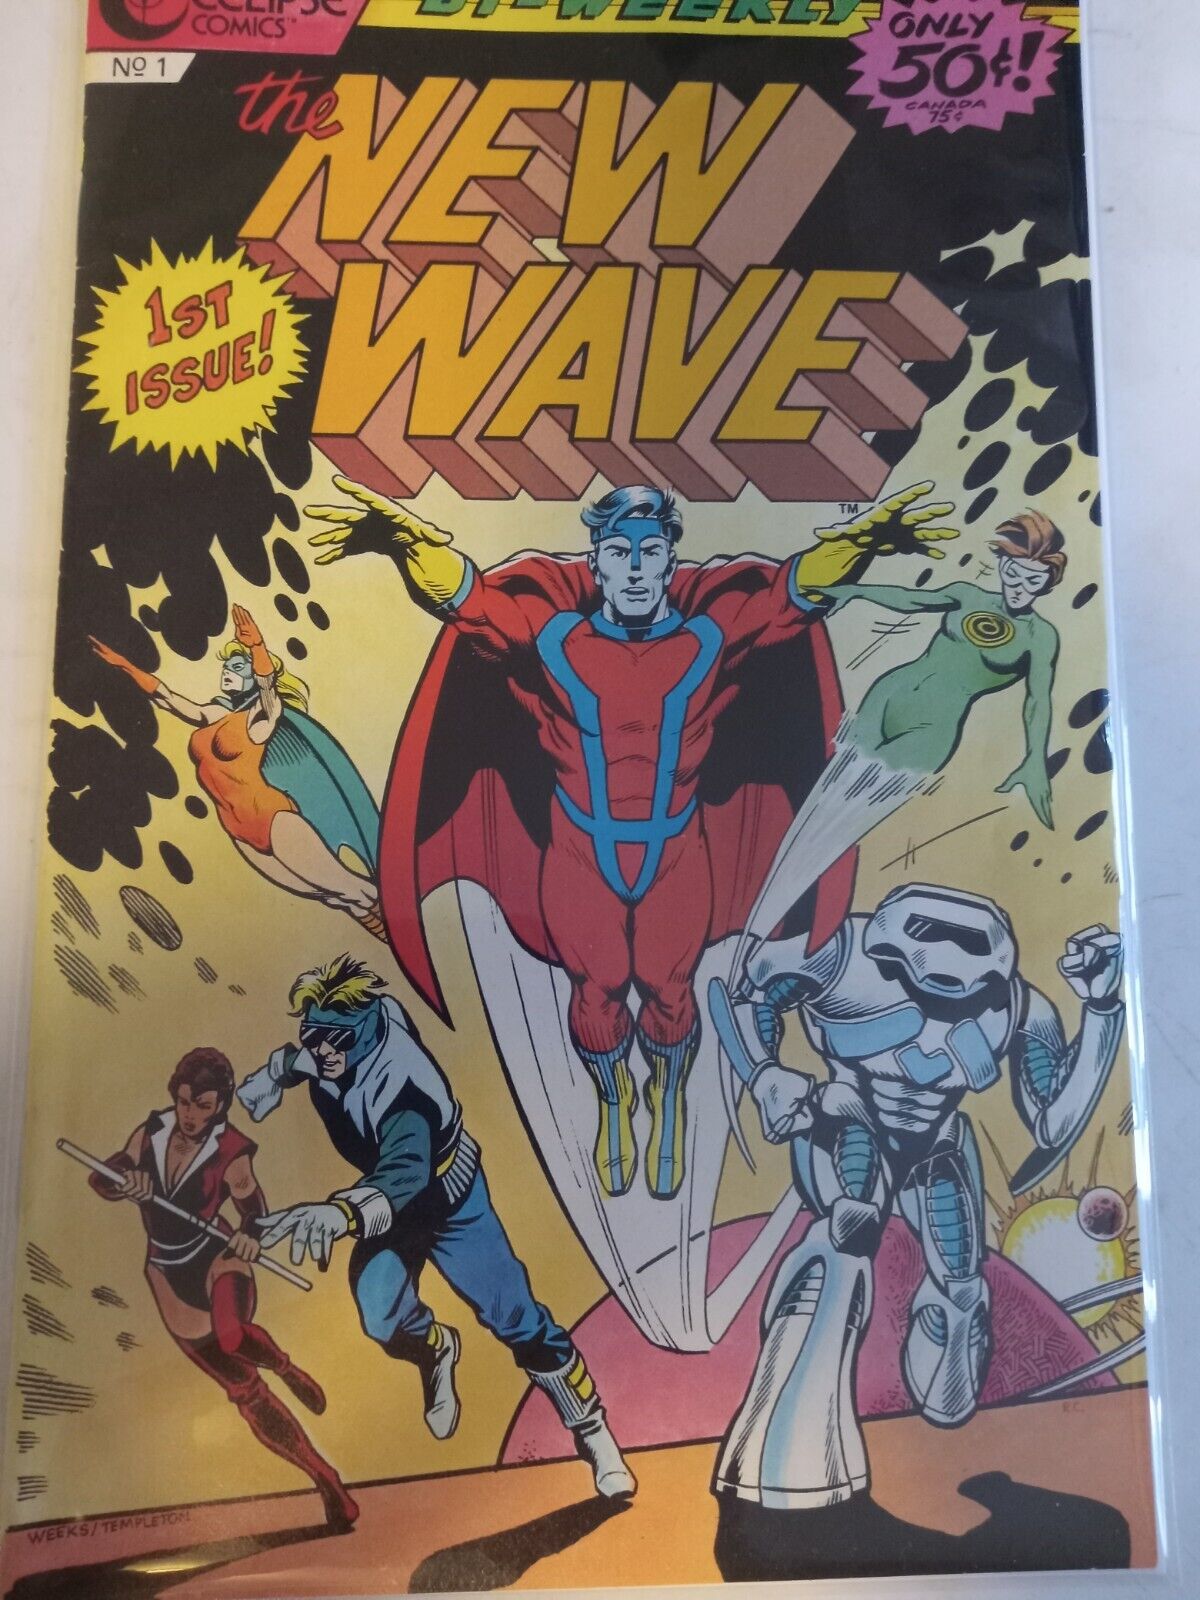 1986 The New Wave Comic 1st Issue, Eclipse excellent condition 